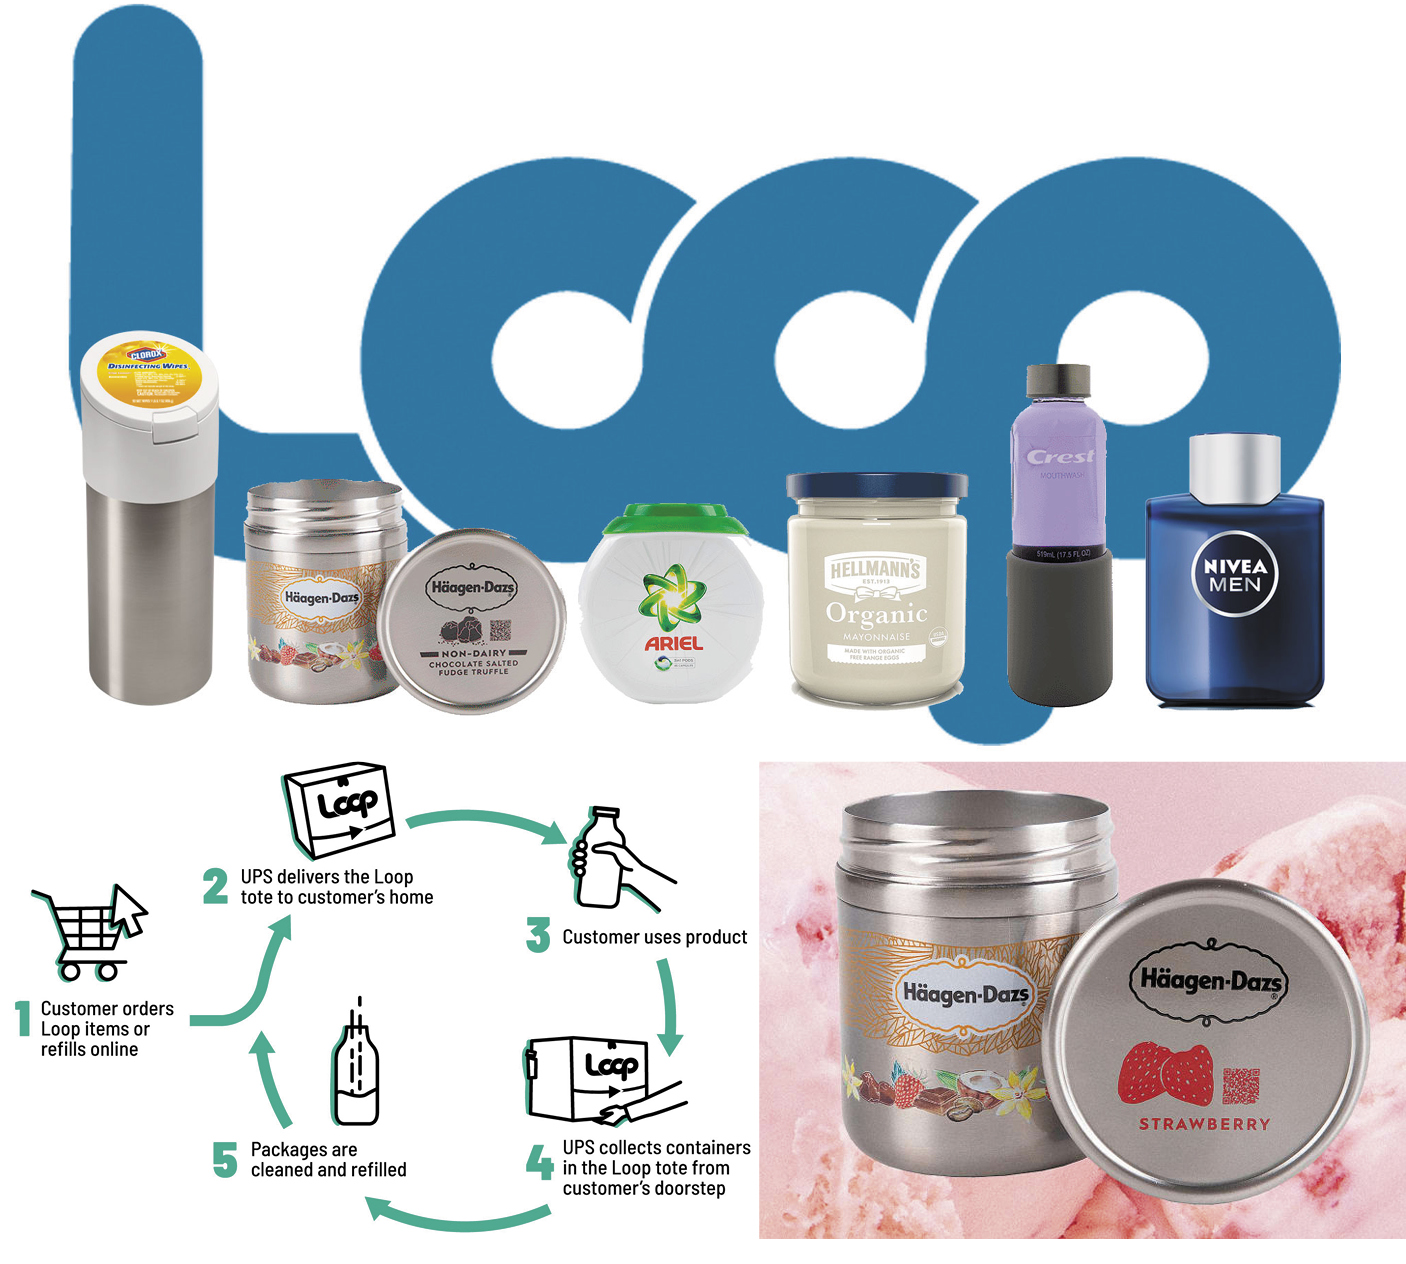 Loop: Empty containers are refilled and redelivered to consumers.